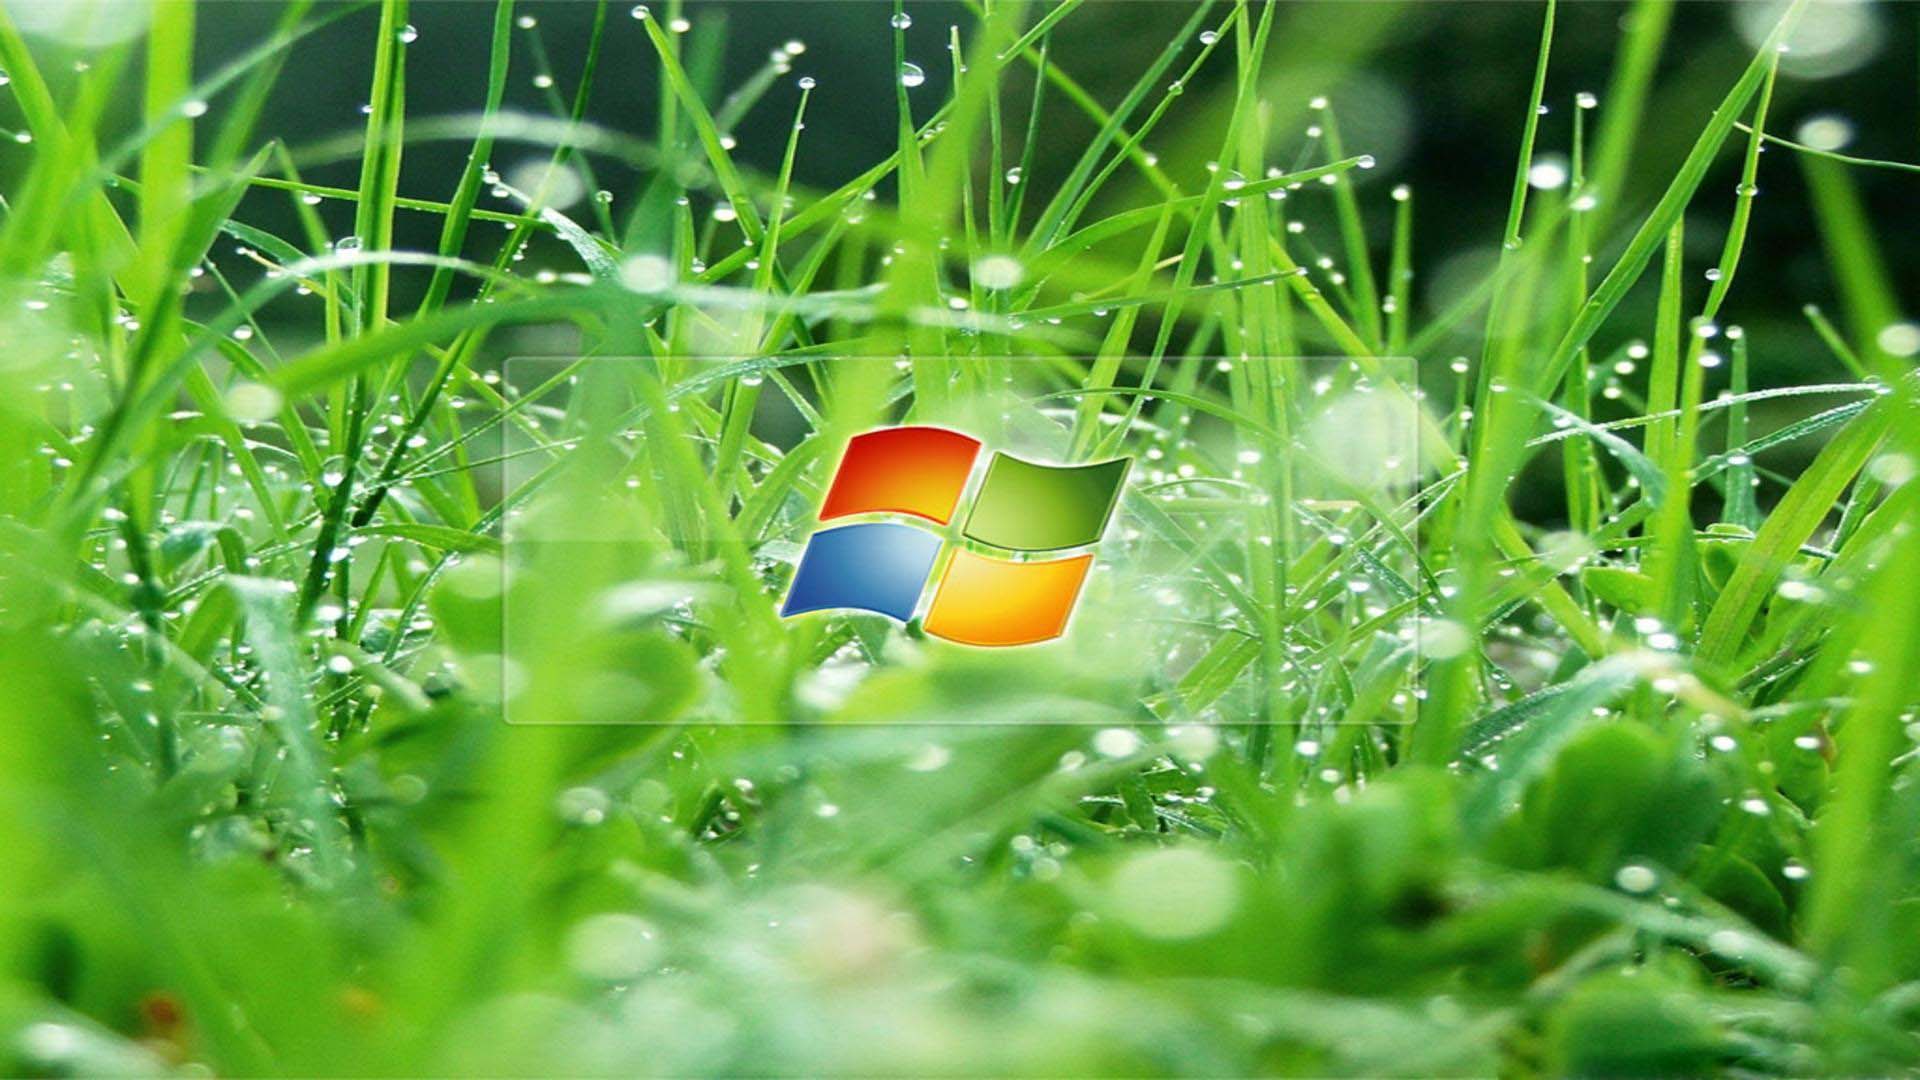 3d wallpapers free download for windows 8